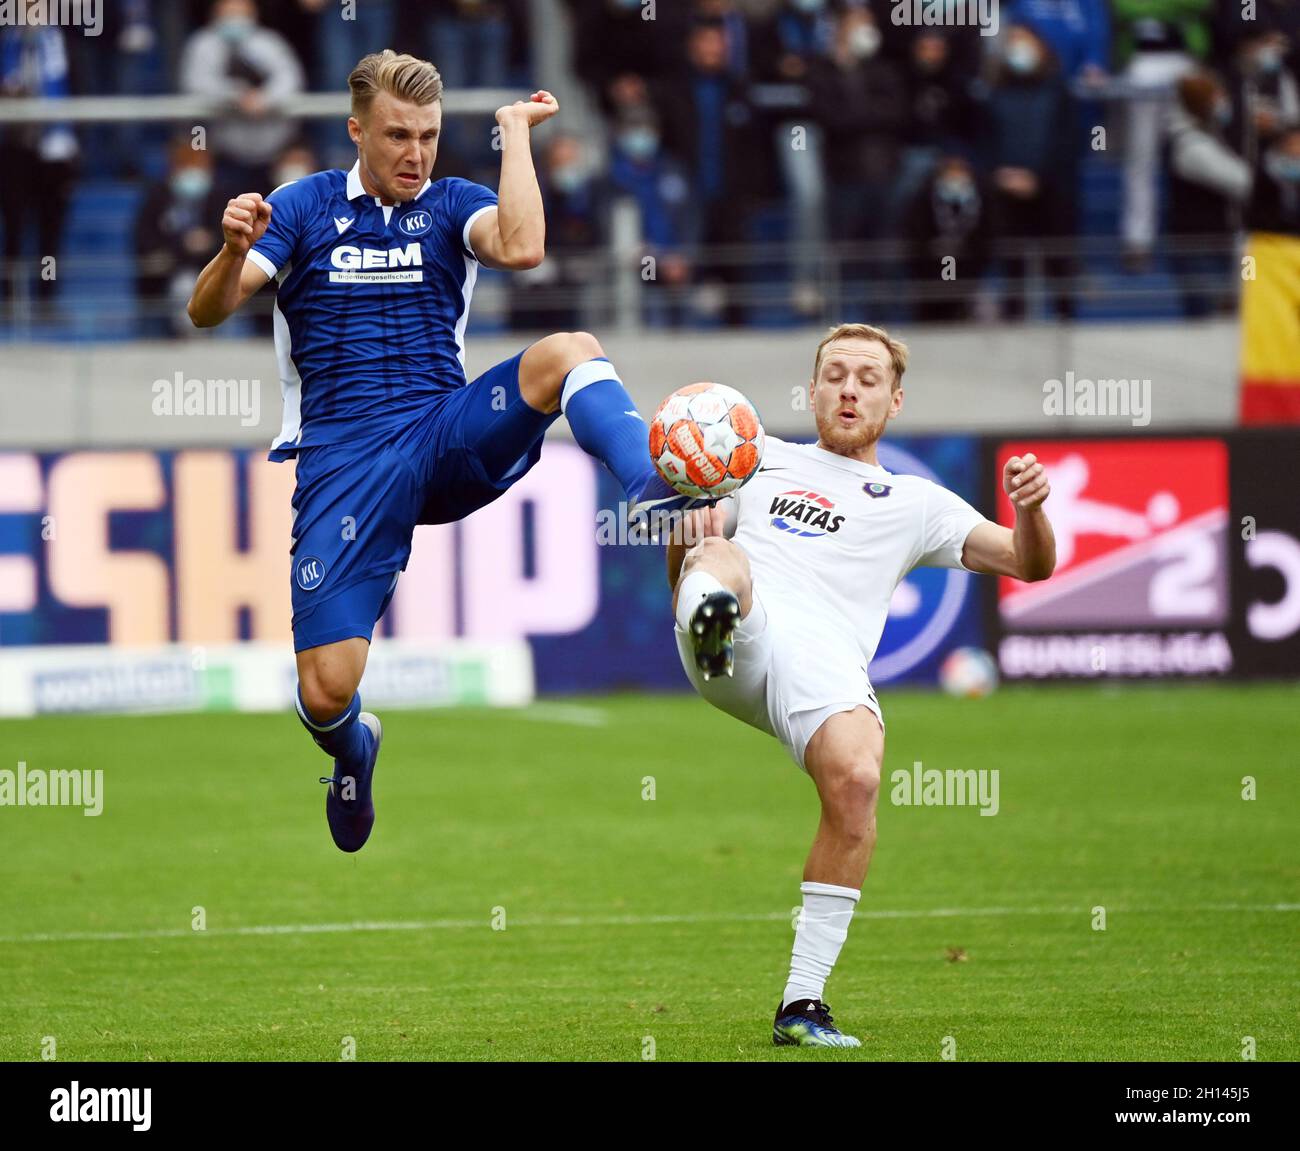 Karlsruhe, Germany. 16th Oct, 2021. Football: 2nd Bundesliga, Karlsruher SC - Erzgebirge Aue, Matchday 10, at BBBank Wildpark. Karlsruhe's Marco Thiede (l) and Aue's Ben Zolinski fight for the ball. Credit: Uli Deck/dpa - IMPORTANT NOTE: In accordance with the regulations of the DFL Deutsche Fußball Liga and/or the DFB Deutscher Fußball-Bund, it is prohibited to use or have used photographs taken in the stadium and/or of the match in the form of sequence pictures and/or video-like photo series./dpa/Alamy Live News Stock Photo